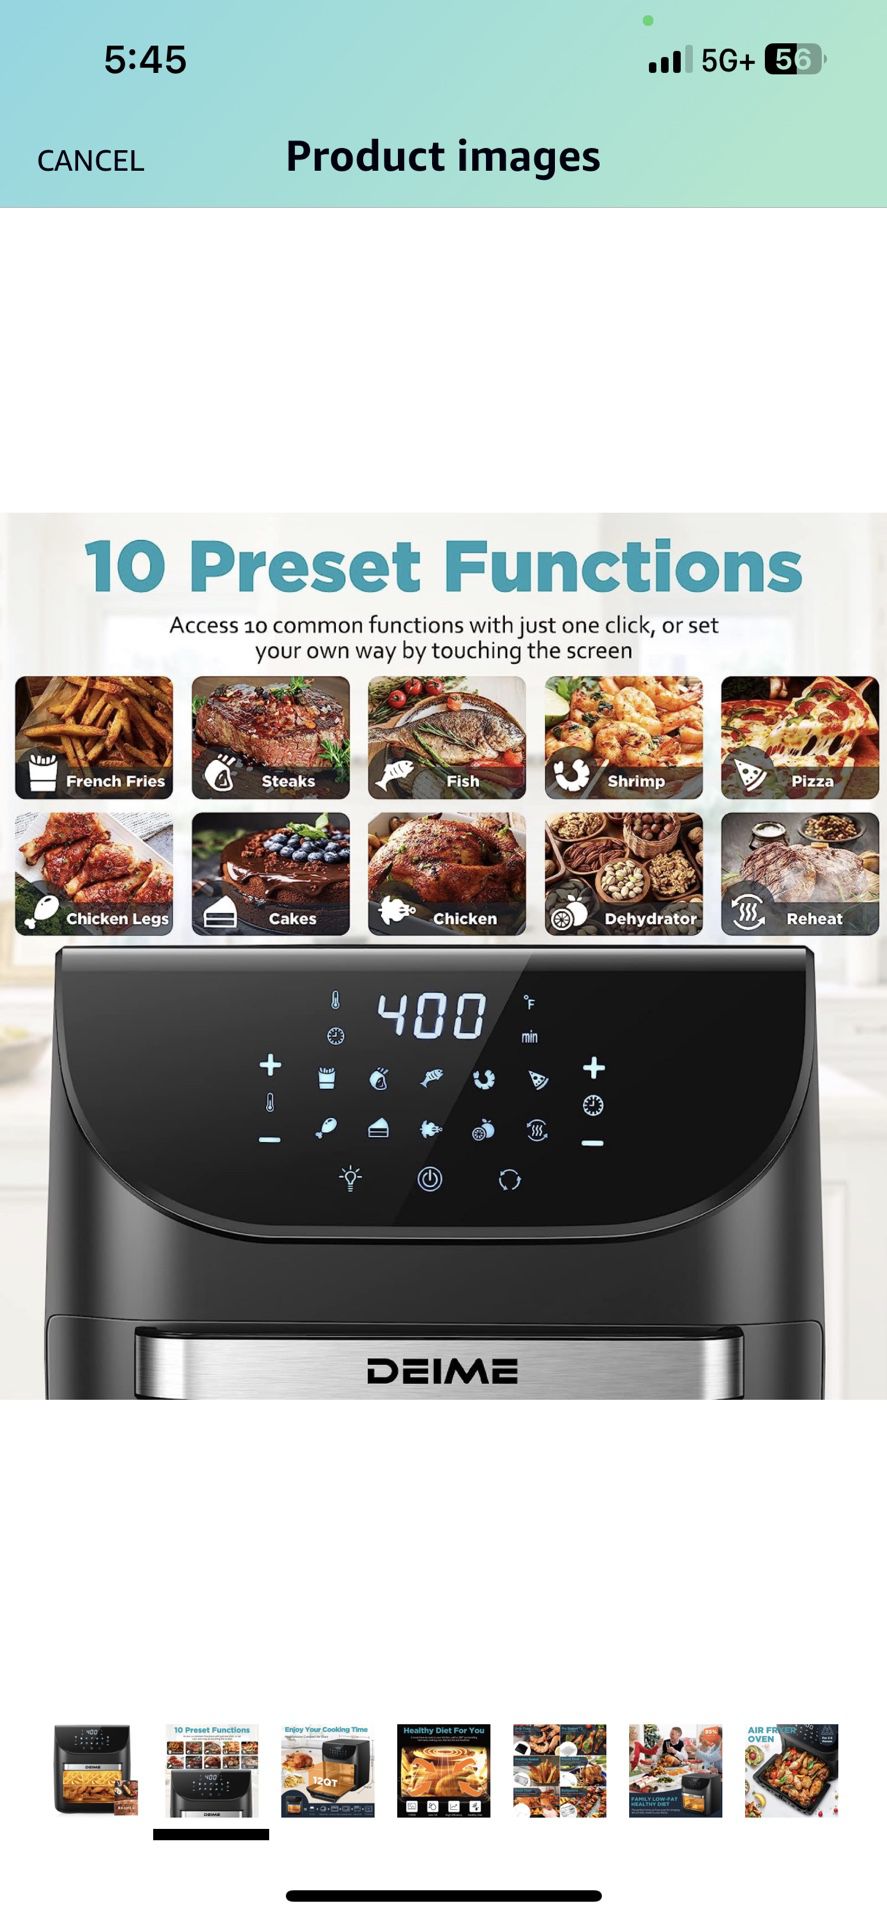 NEW 14qt All-in-one Air fryer, Oven, Rostisserie, Dehydrator With 12  Cooking Functions for Sale in El Paso, TX - OfferUp